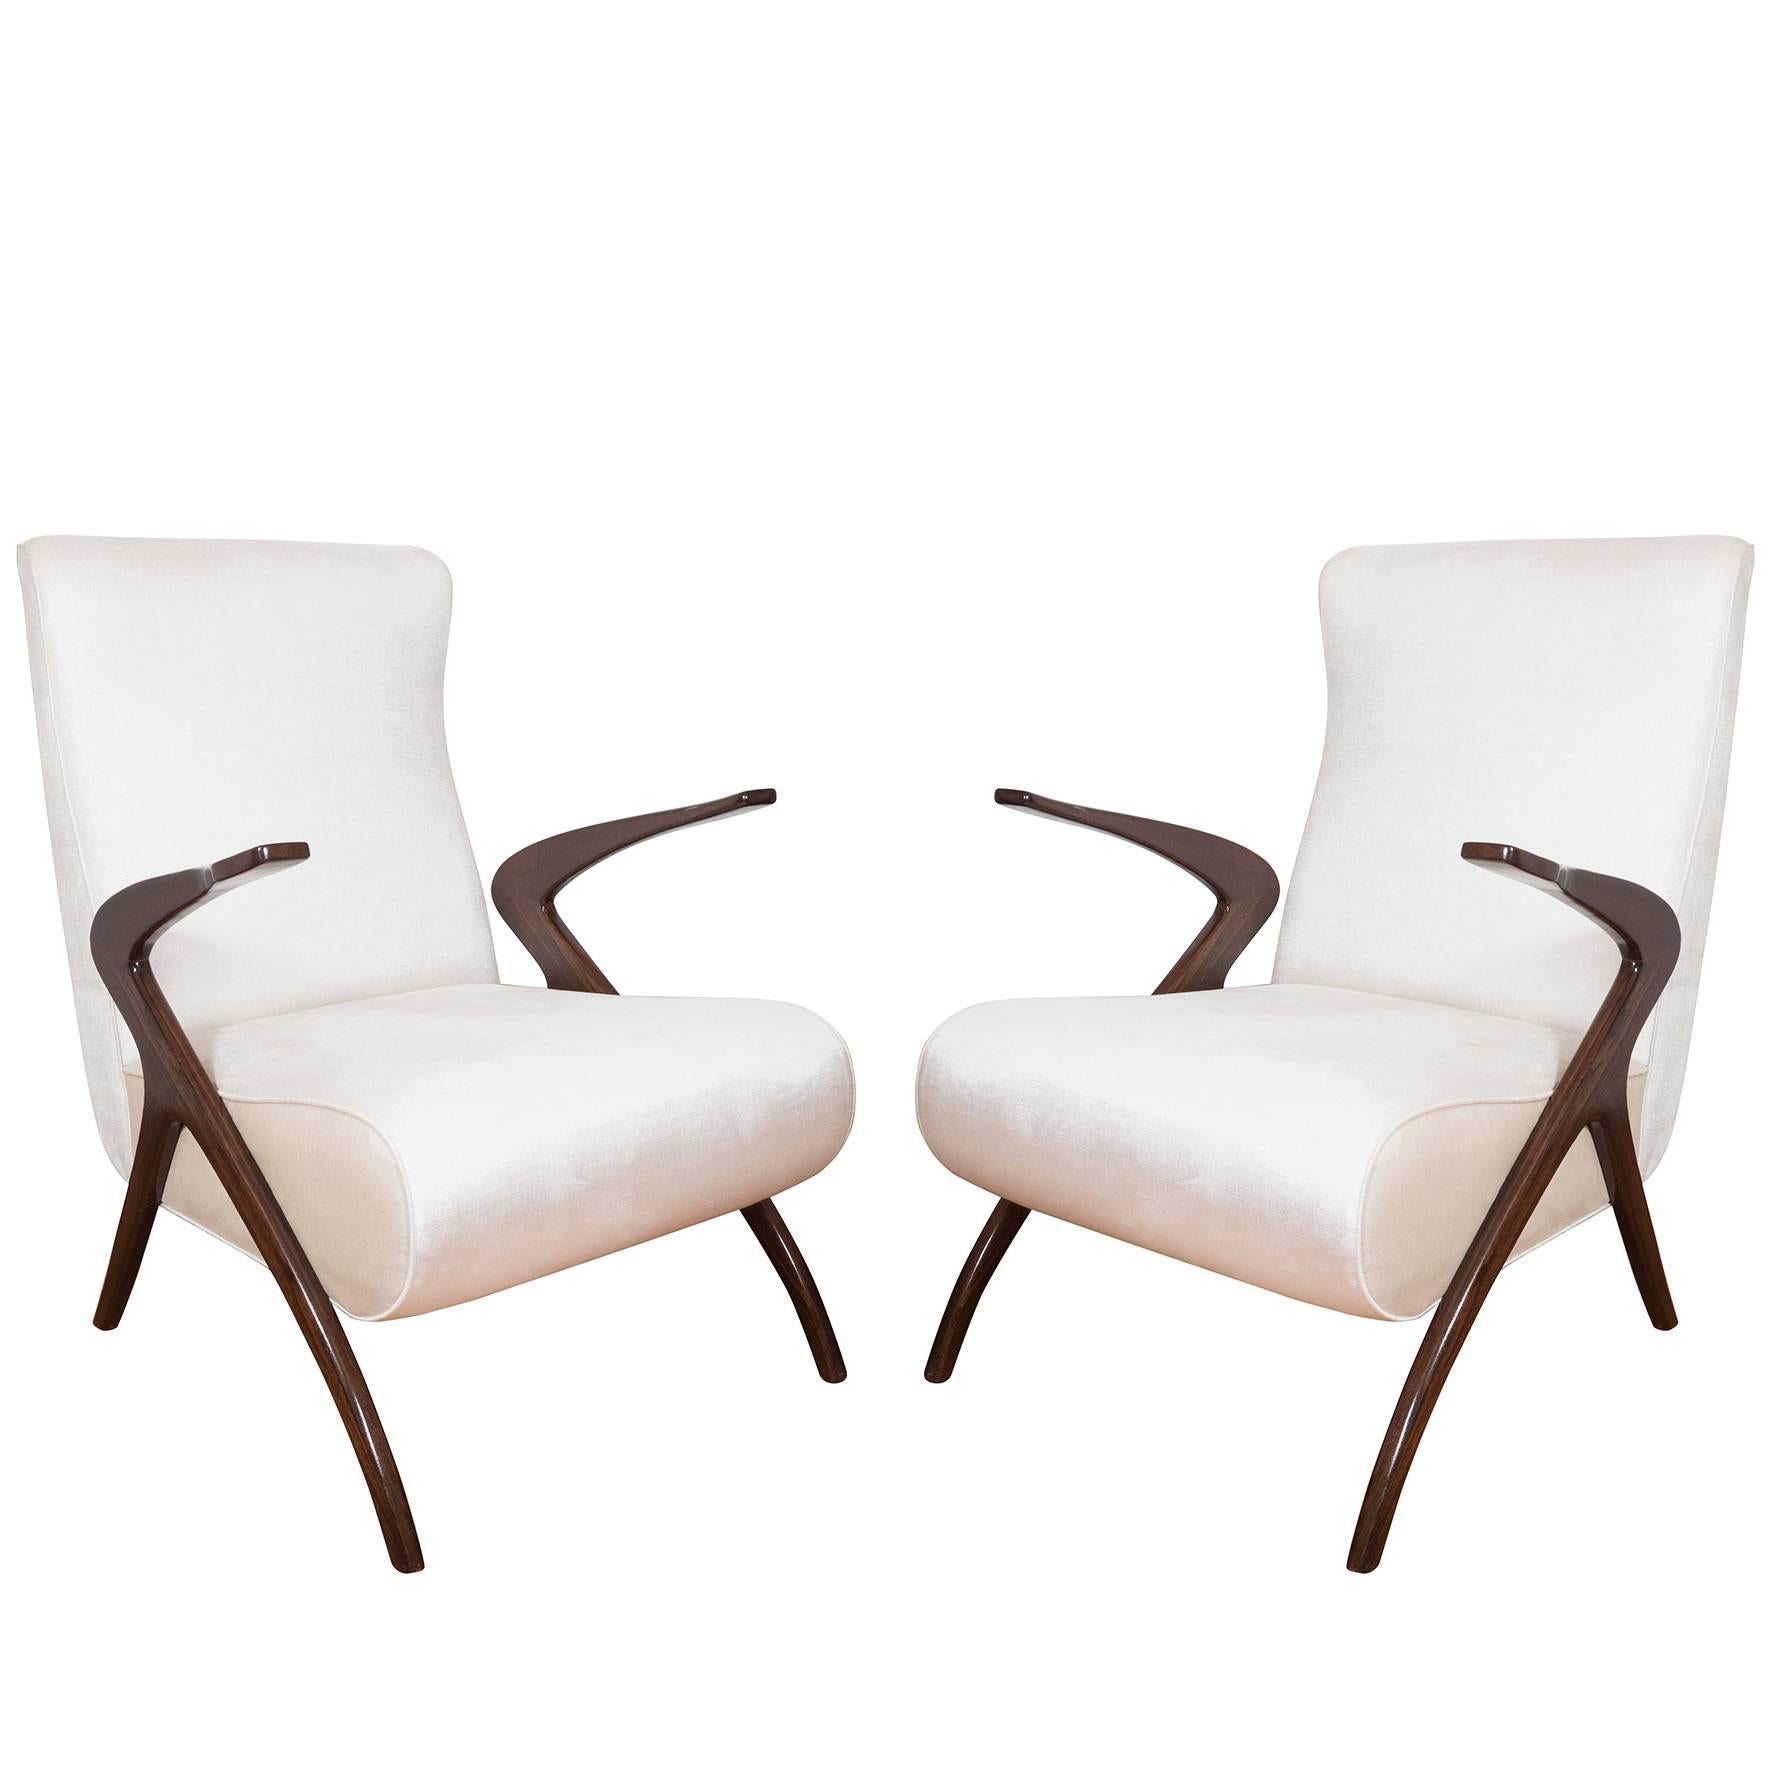 Pair of Highly Stylized Armchairs